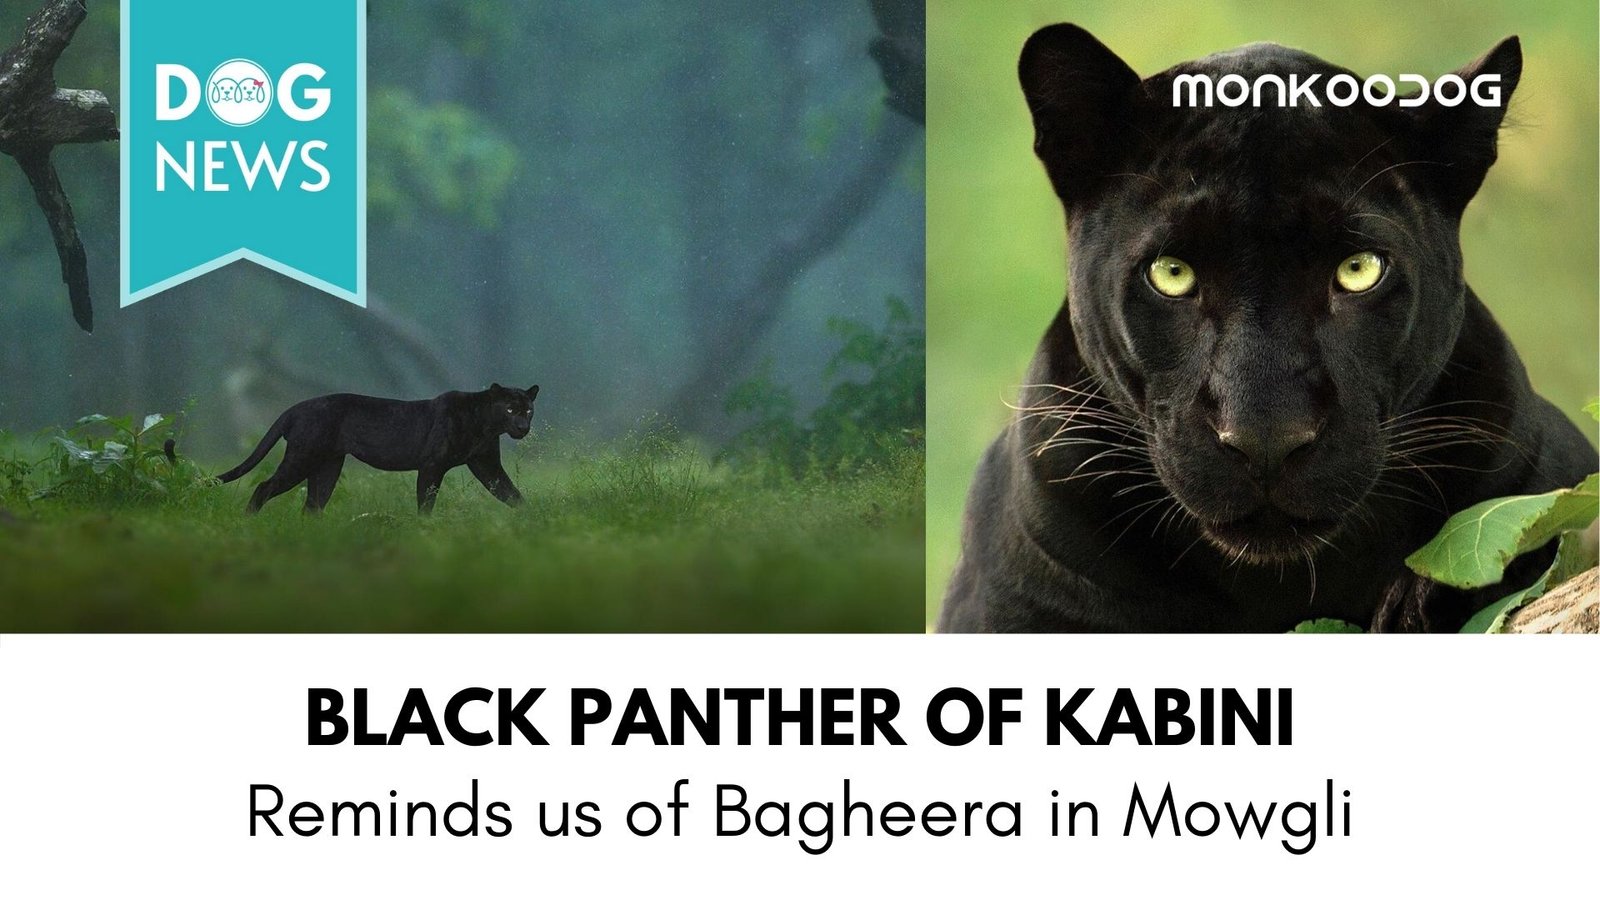 Black Panther spotted in Karnataka's Dense Kabini Forest. Pictures going Viral.